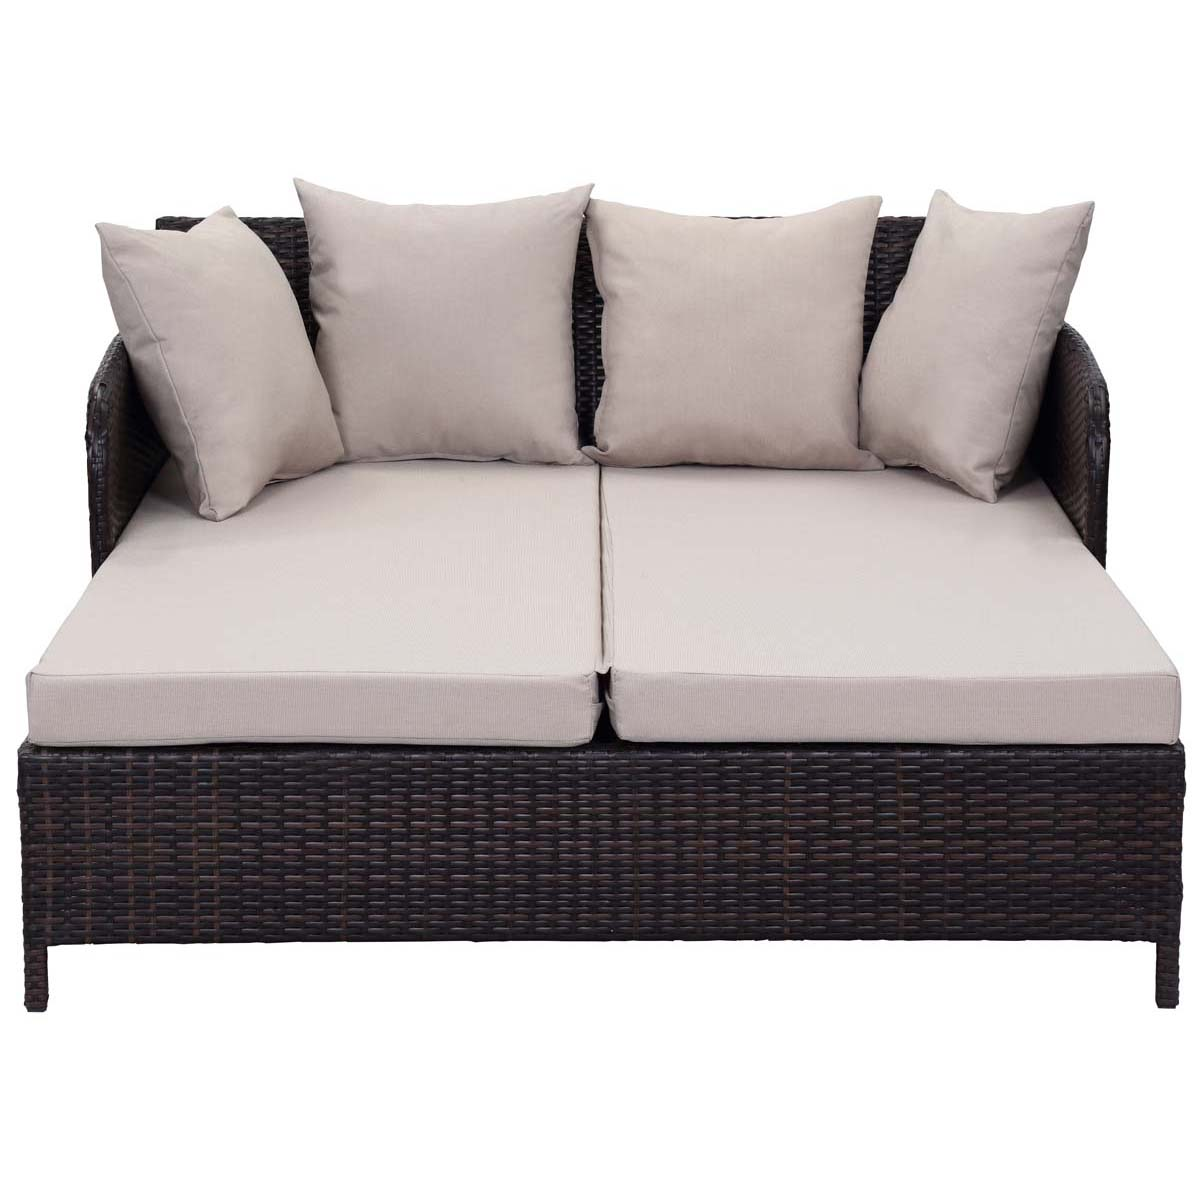 Safavieh August Daybed , PAT2500